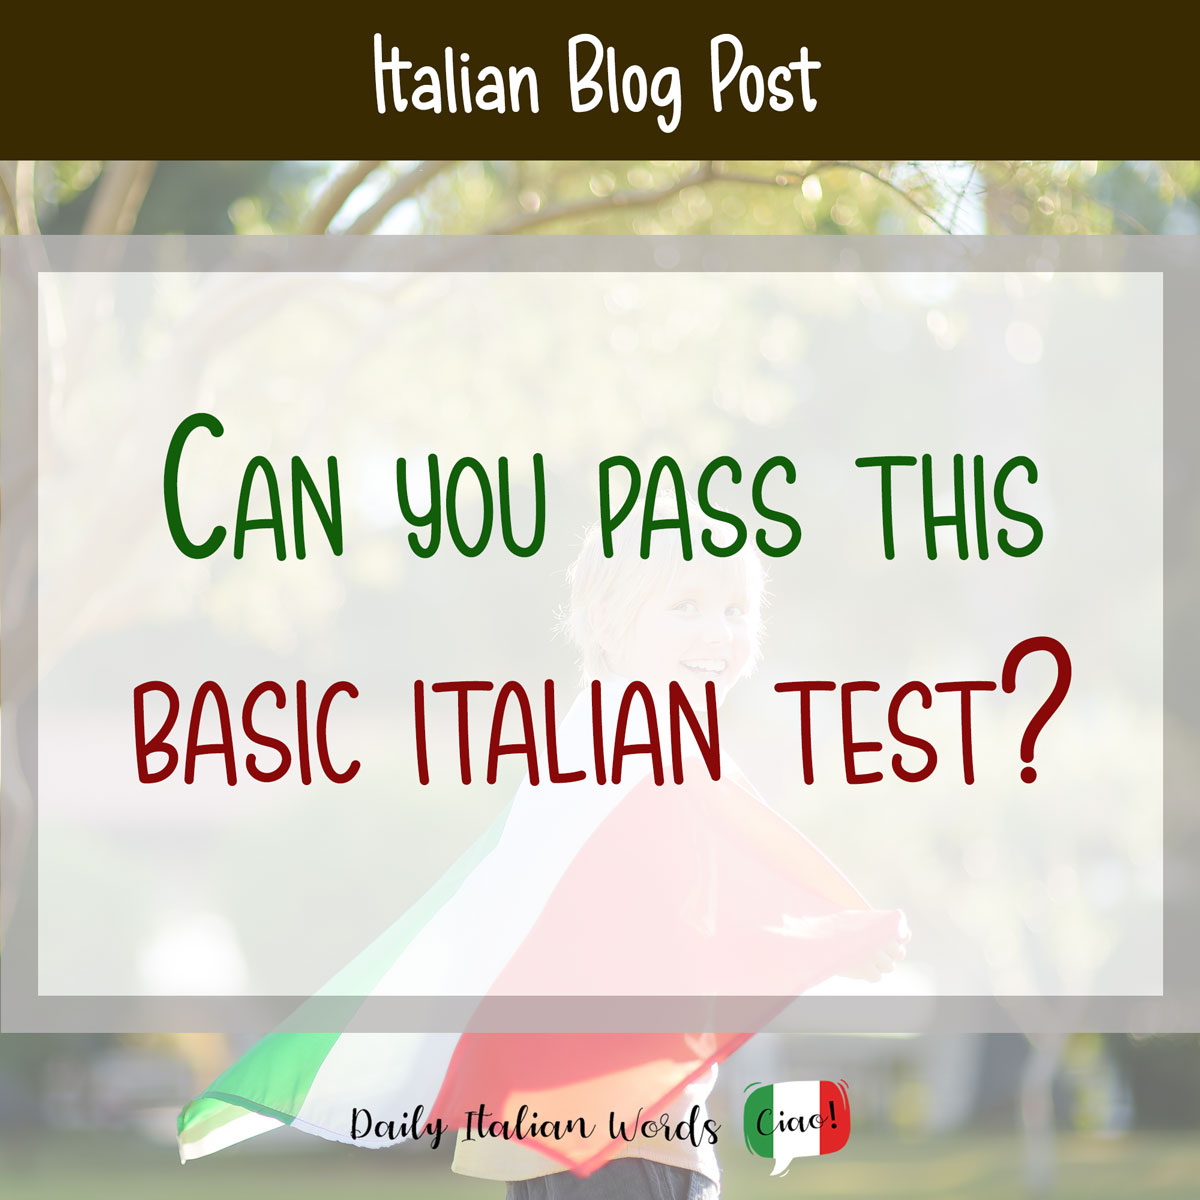 Can you pass this basic Italian test?